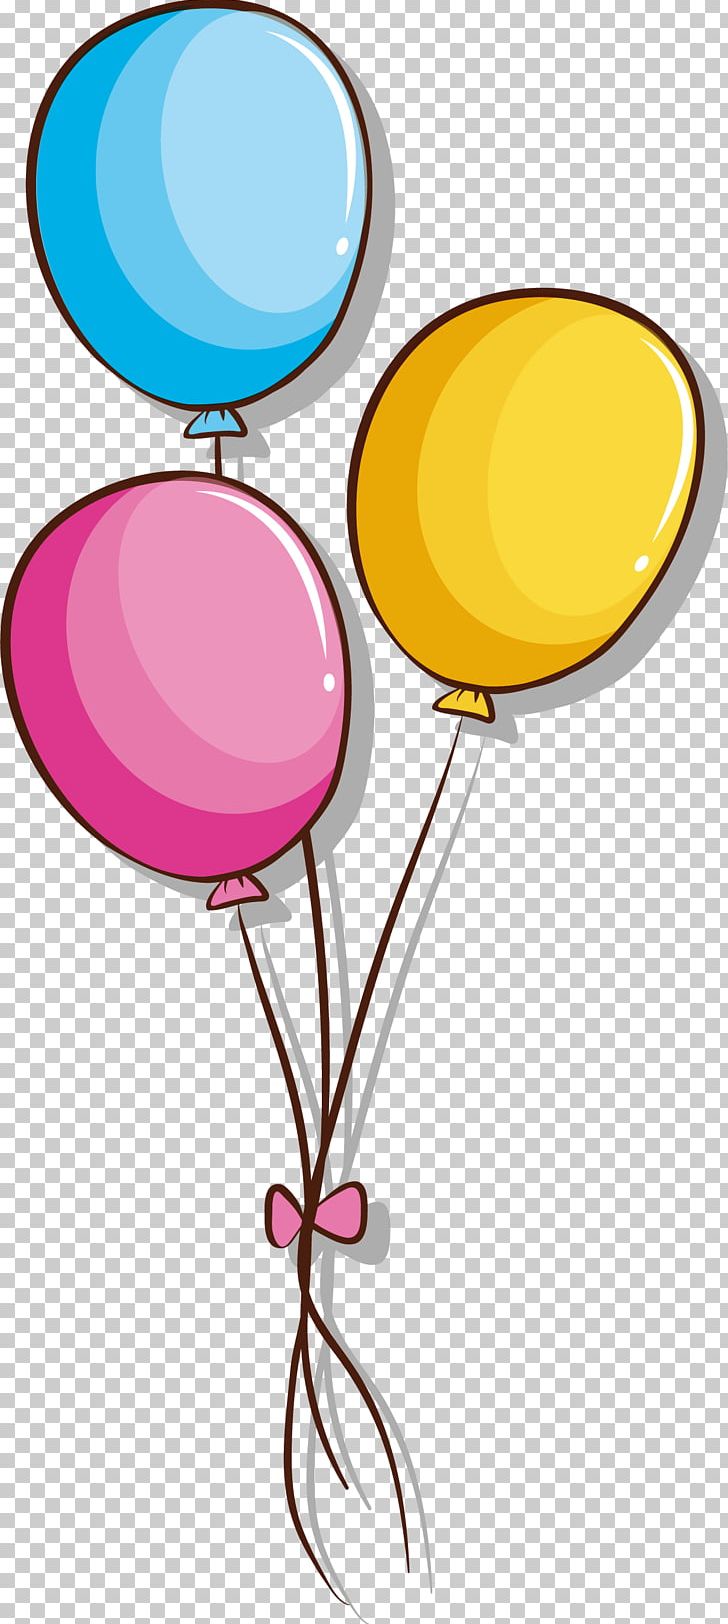 Drawing Toy Balloon Illustration PNG, Clipart, Balloon, Balloon Cartoon, Balloons, Balloons Vector, Bunch Vector Free PNG Download